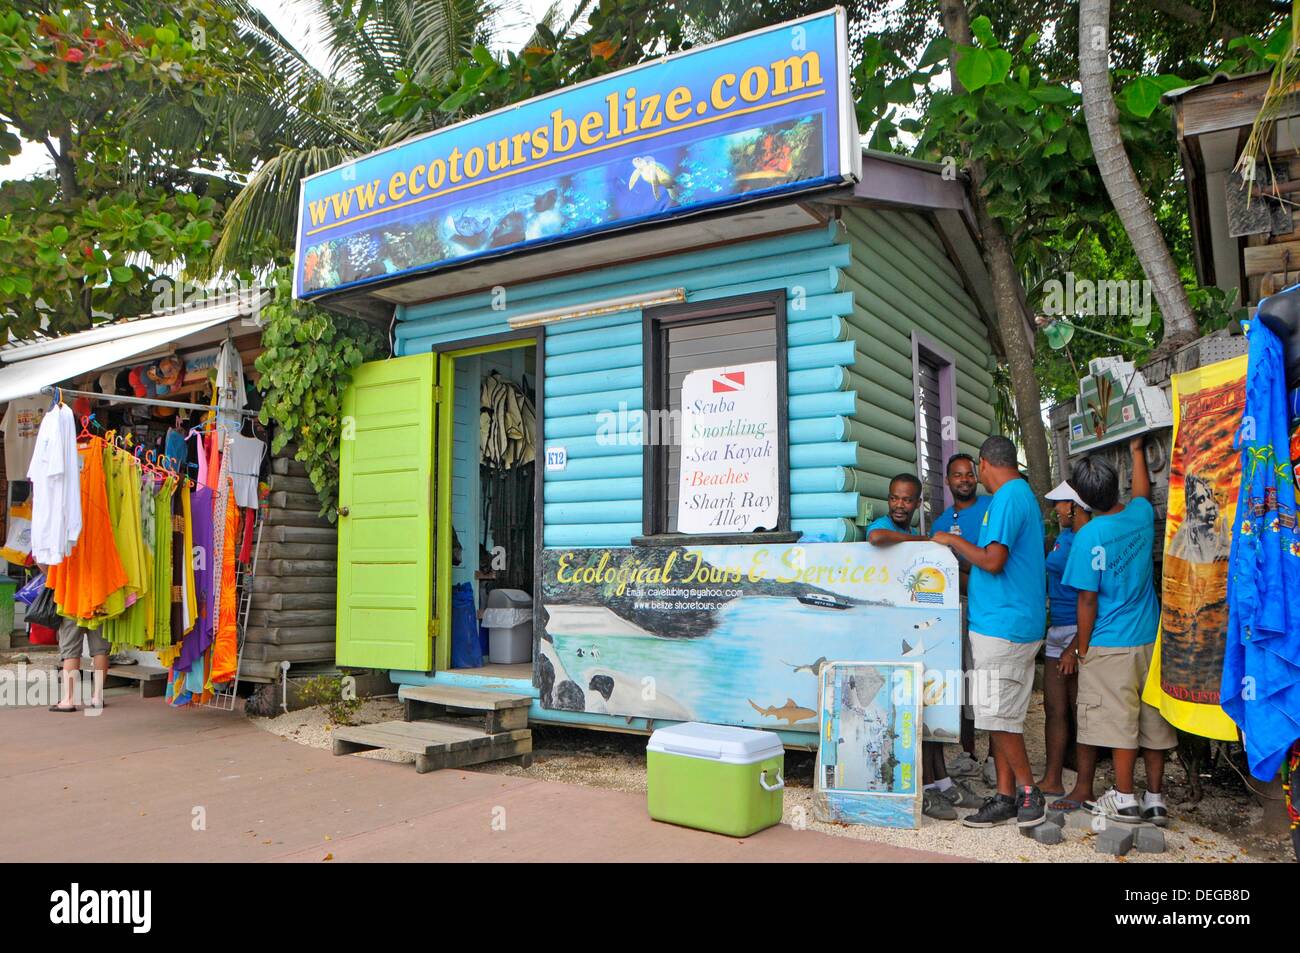 Selling excursion trips near Caribbean Cruise ship in Belize City Belize Central America Stock Photo